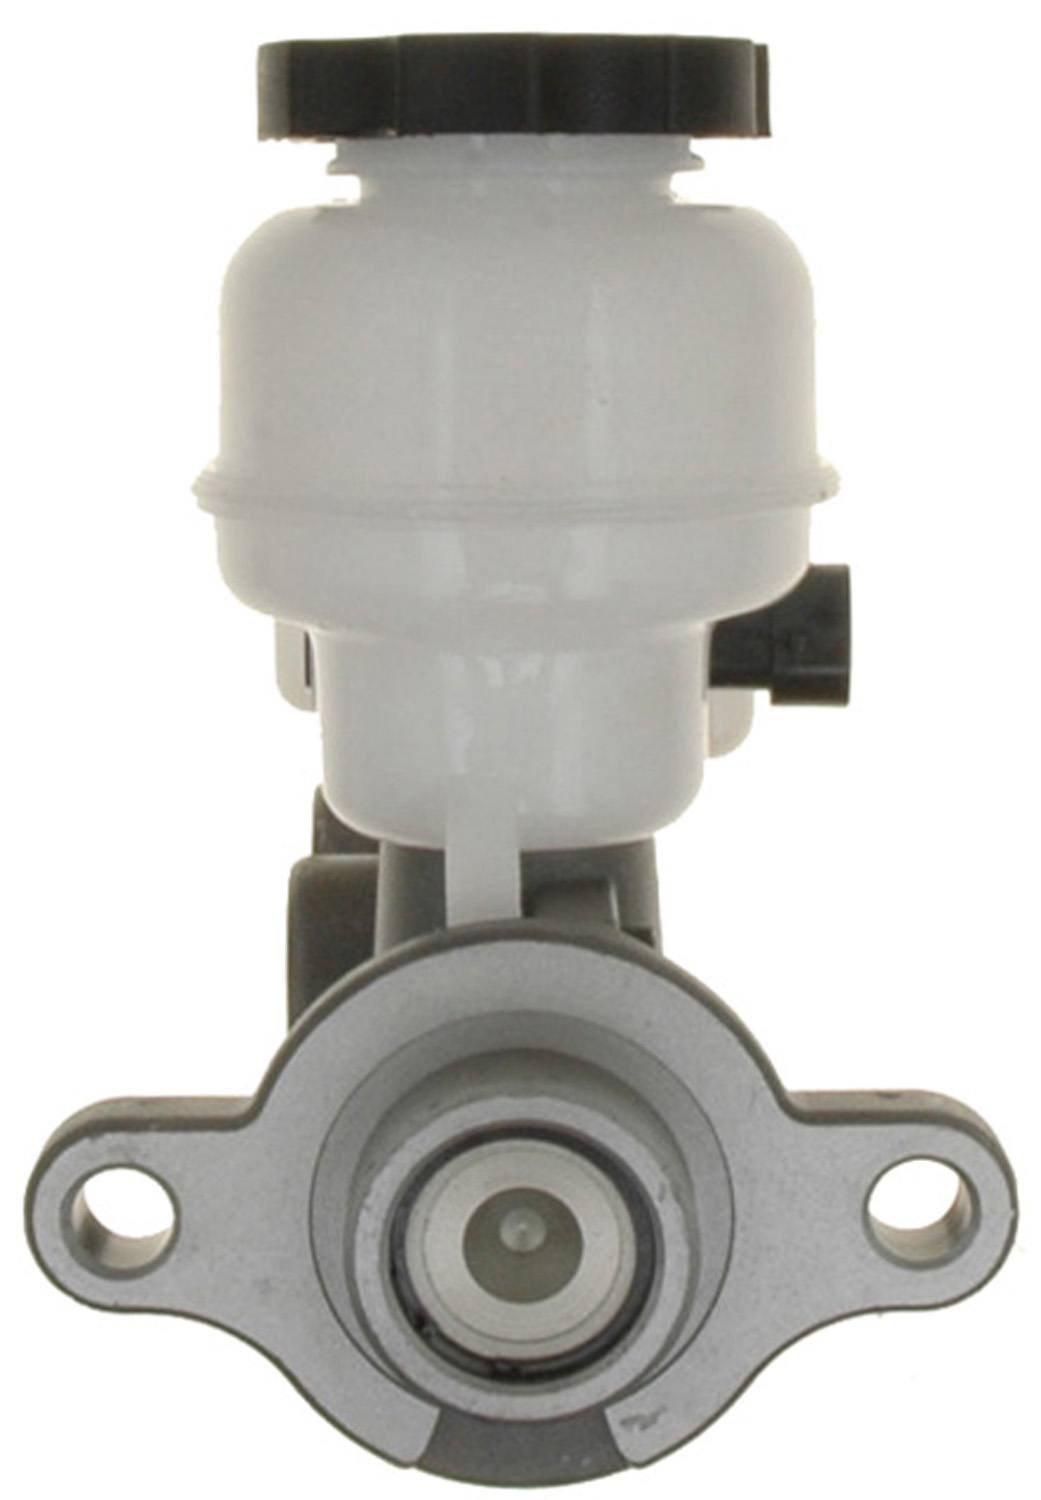 ACDELCO GOLD/PROFESSIONAL BRAKES CANADA - Brake Master Cylinder - DCO 18M2437